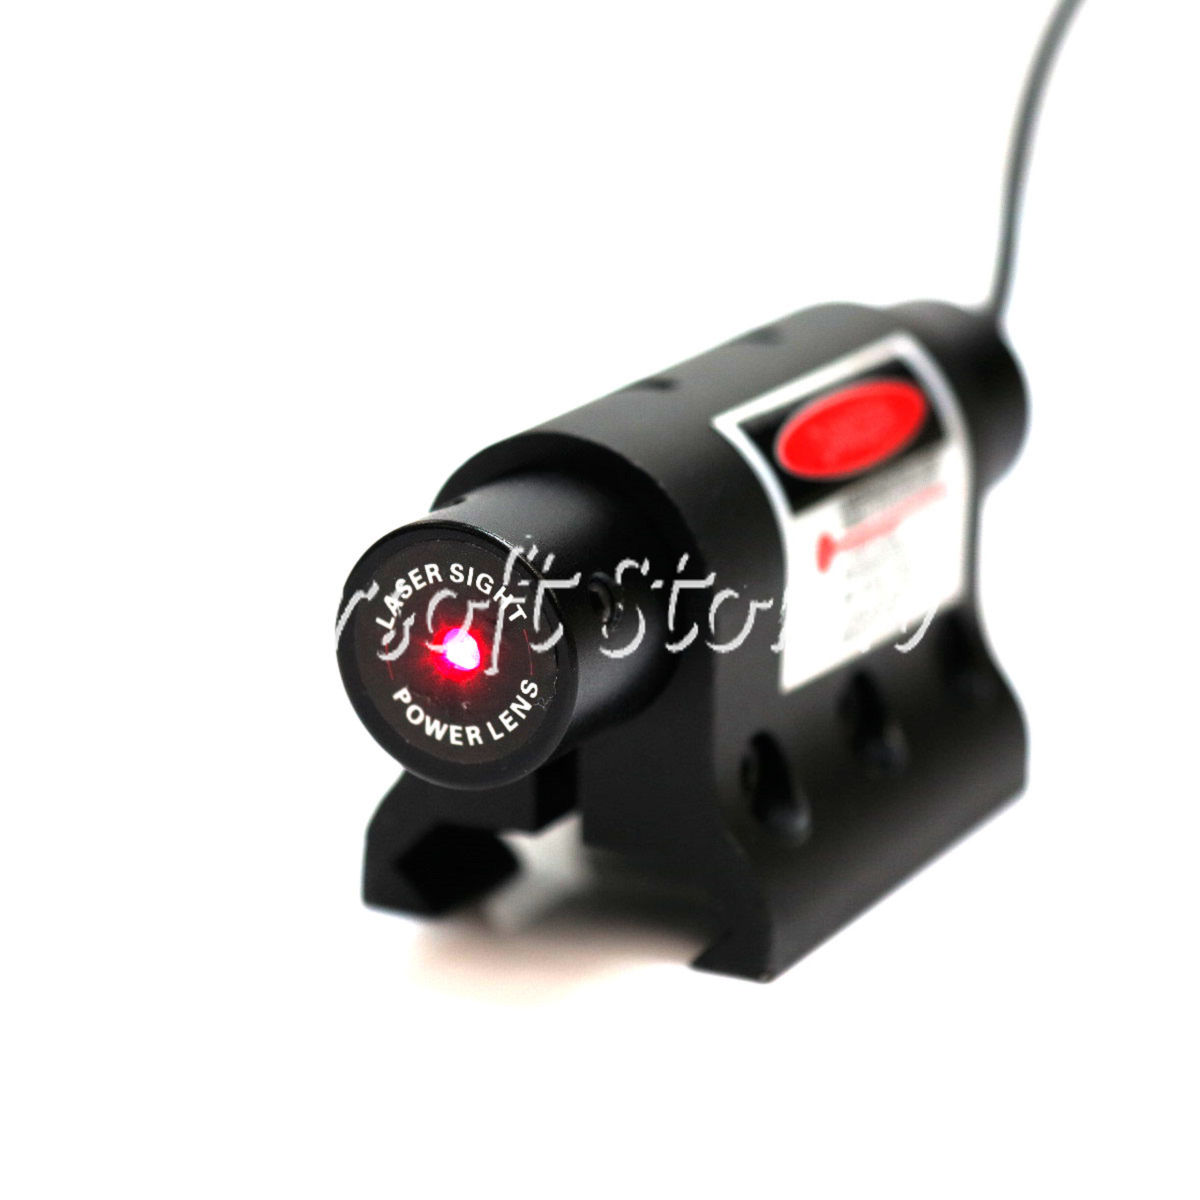 LXGD Tactical Gear Compact Red Laser Tactical Sight Pointer JG-11 - Click Image to Close